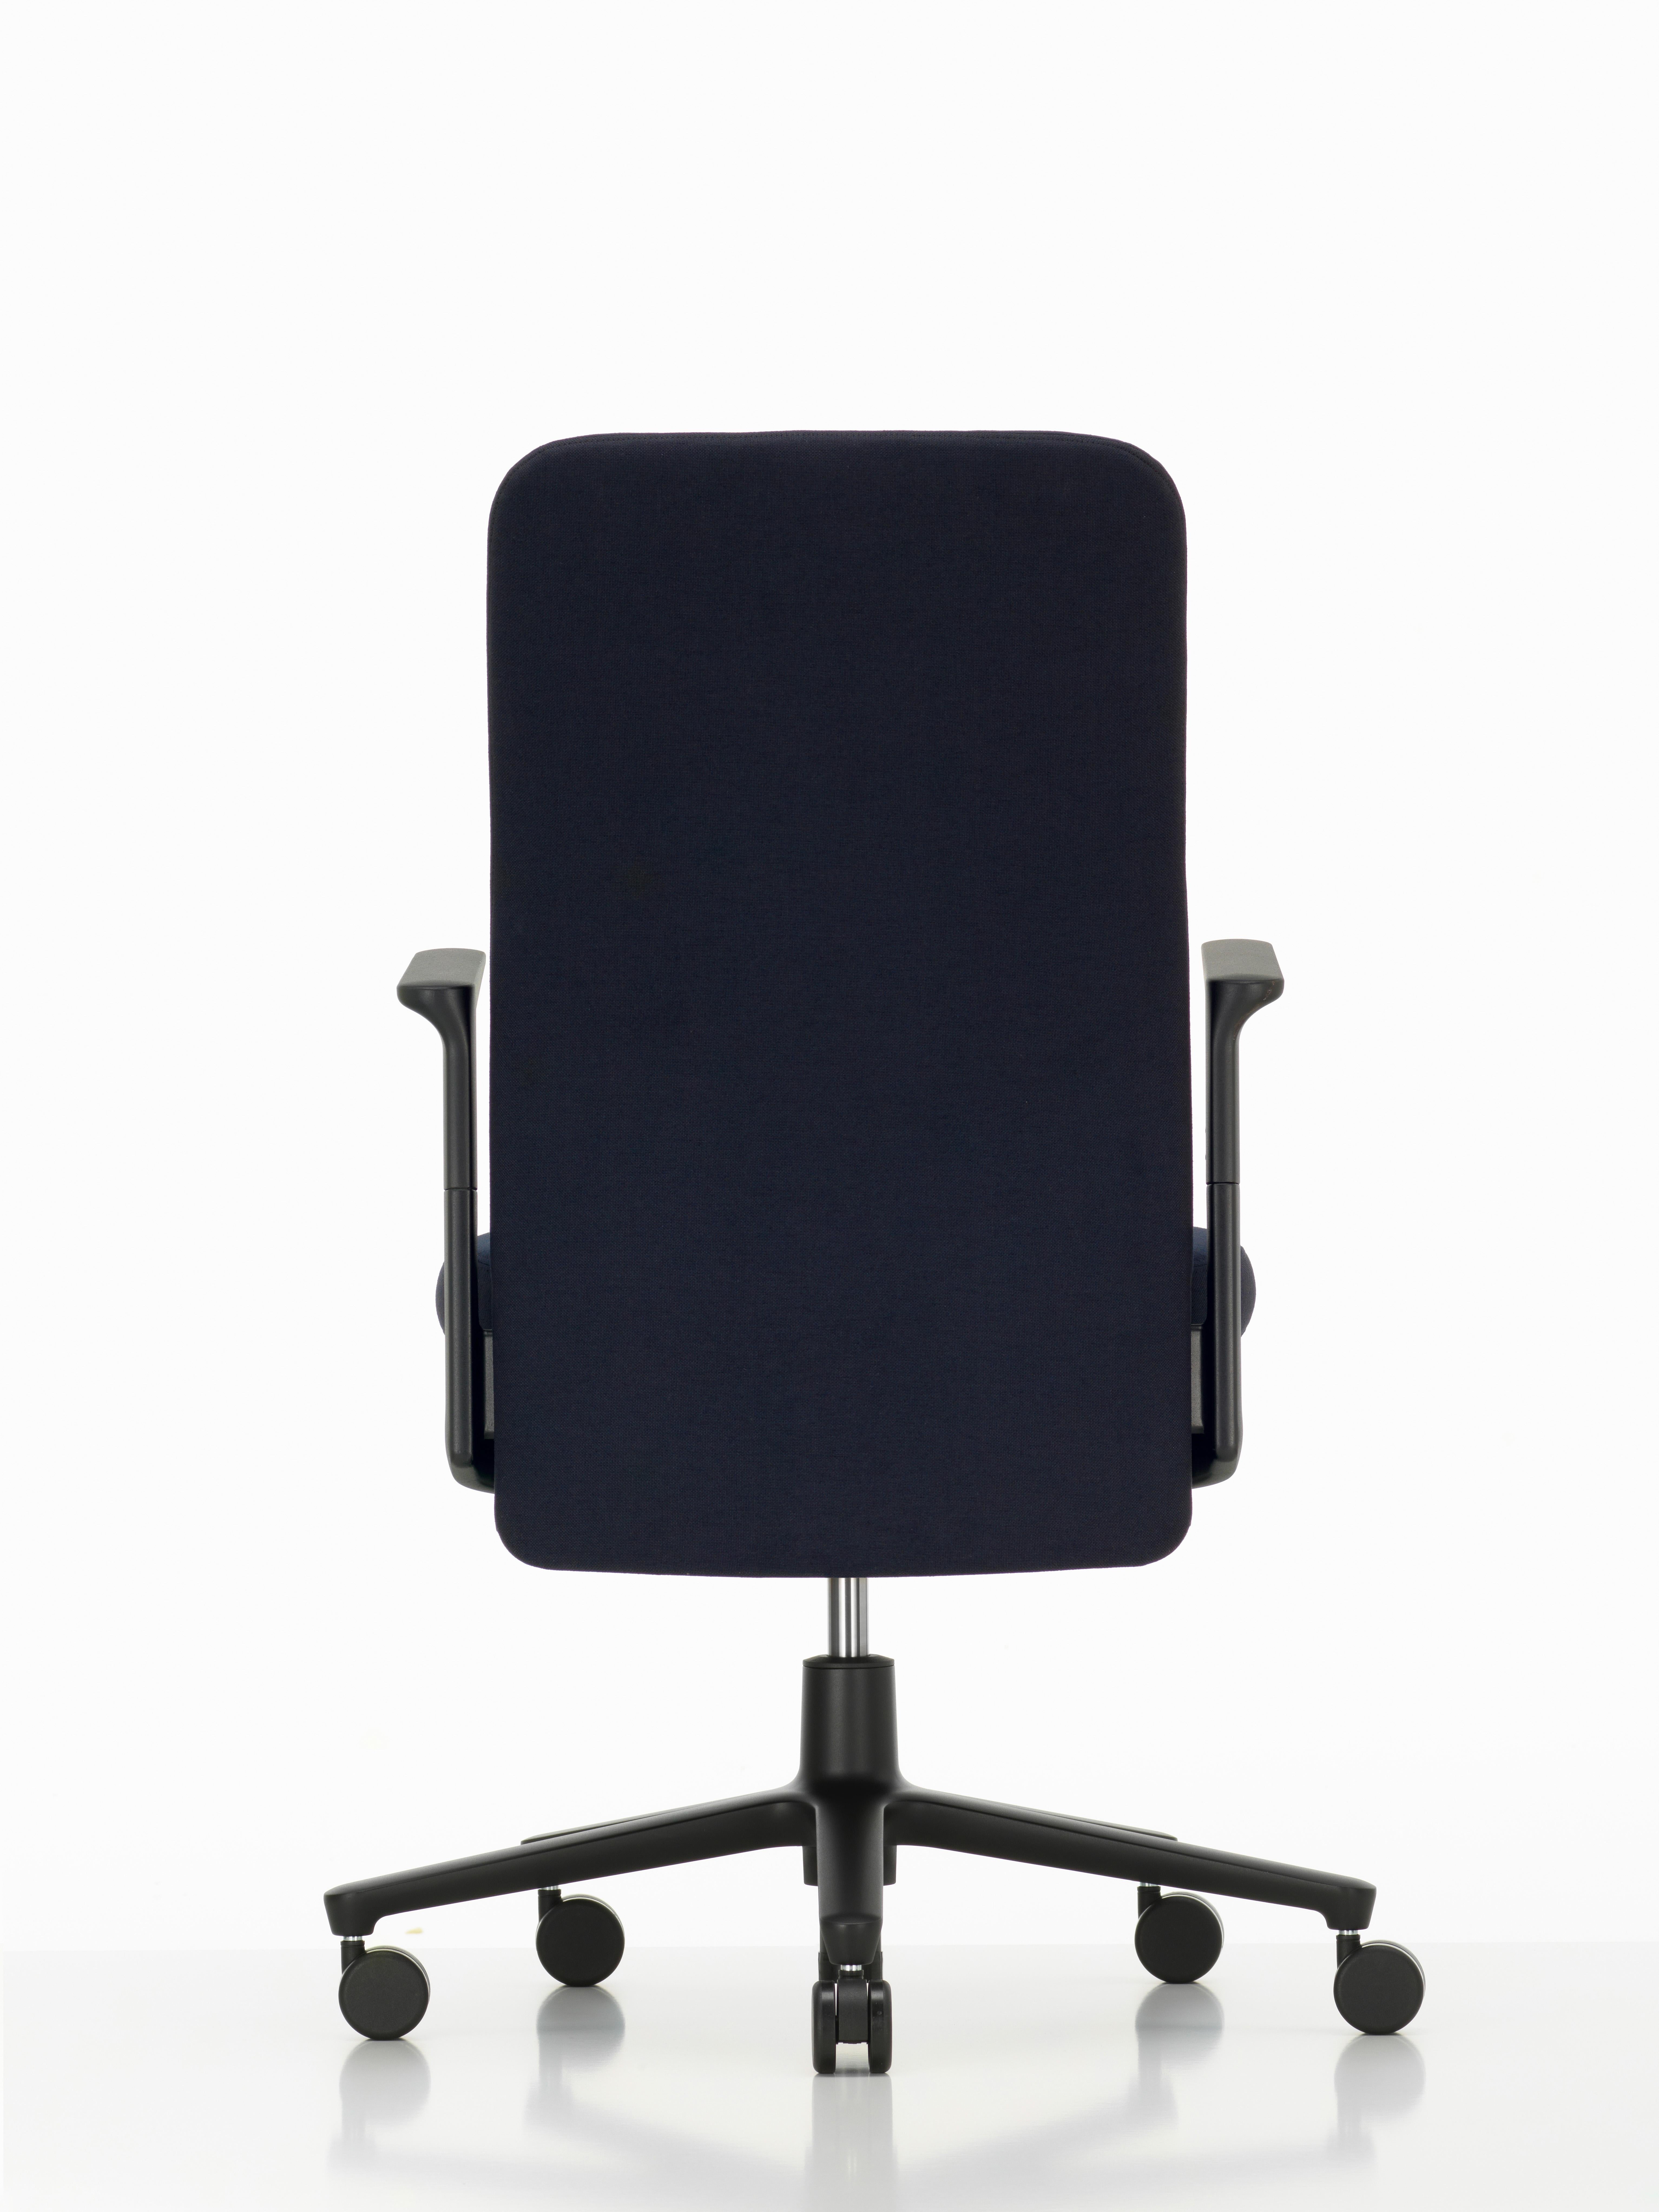 Swiss Vitra Pacific Medium Upholstered Backrest Chair by Edward Barber & Jay Osgerby For Sale